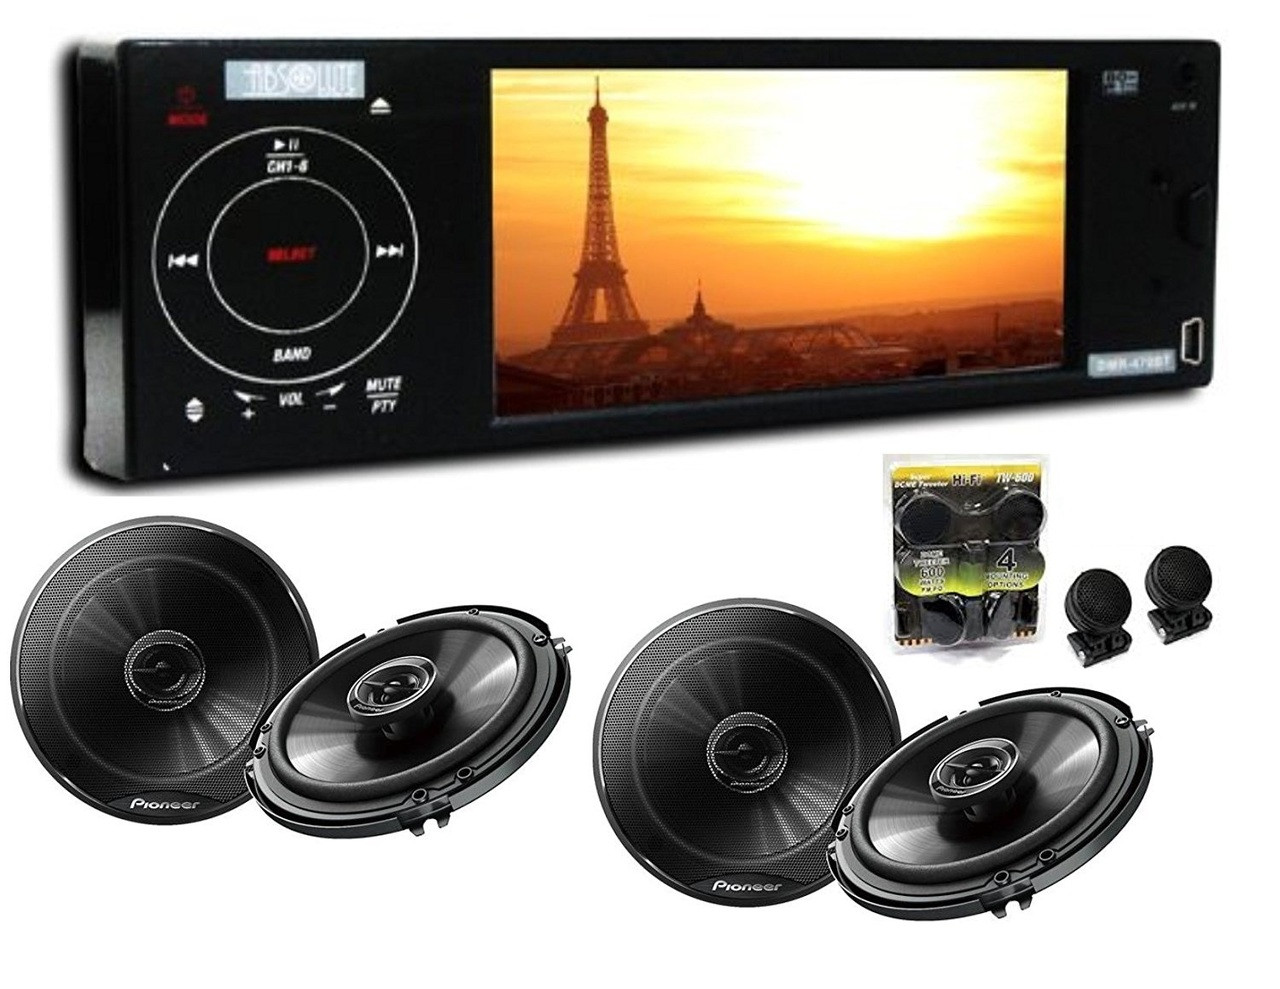 Absolute DMR-470BT 4.2-Inch In-Dash TFT LCD Monitor Multimedia DVD Player With 2 Pairs Of Pioneer TS-G1645R 6.5 Speakers And Free Absolute TW600 Tweeter